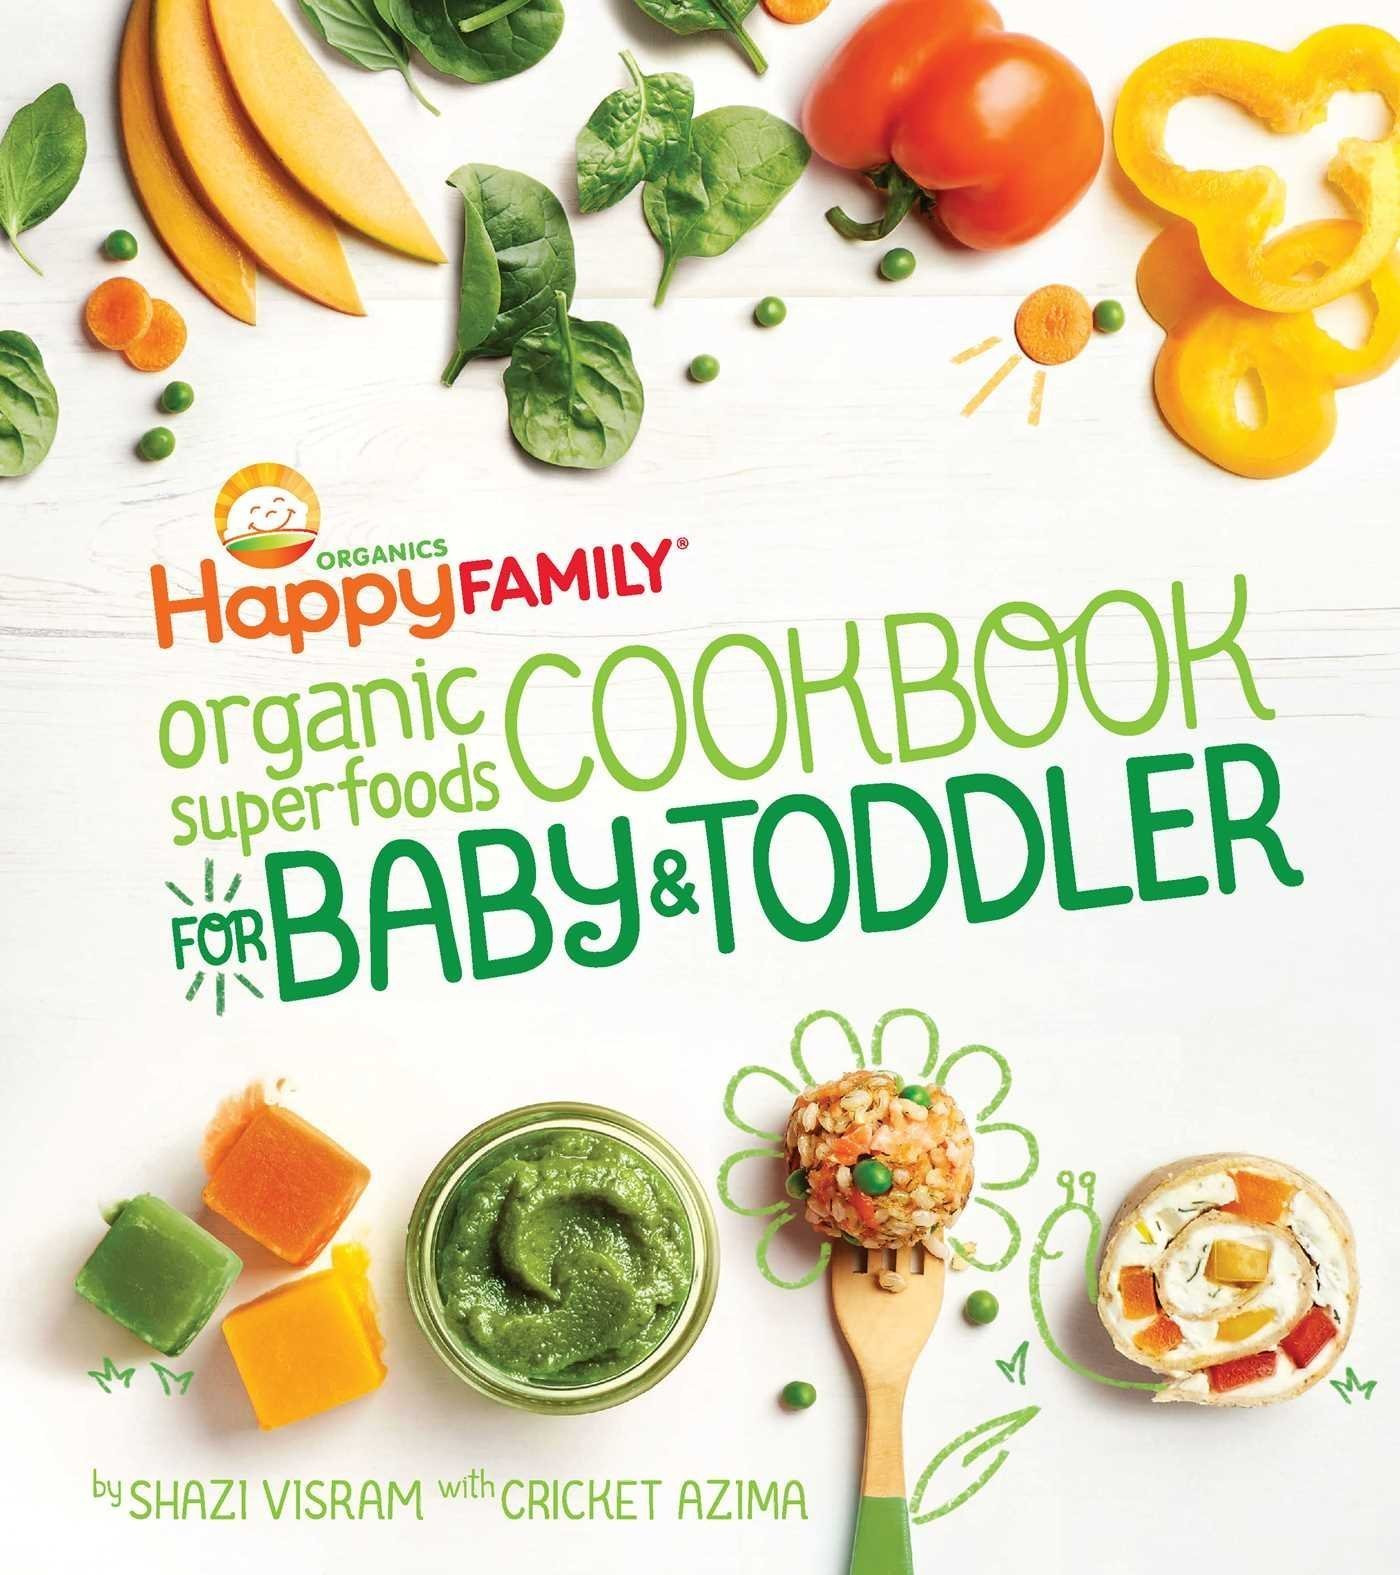 Baby Food Recipes Books
 9 Best No Fuss Cookbooks for Babies & Toddlers Wholesome